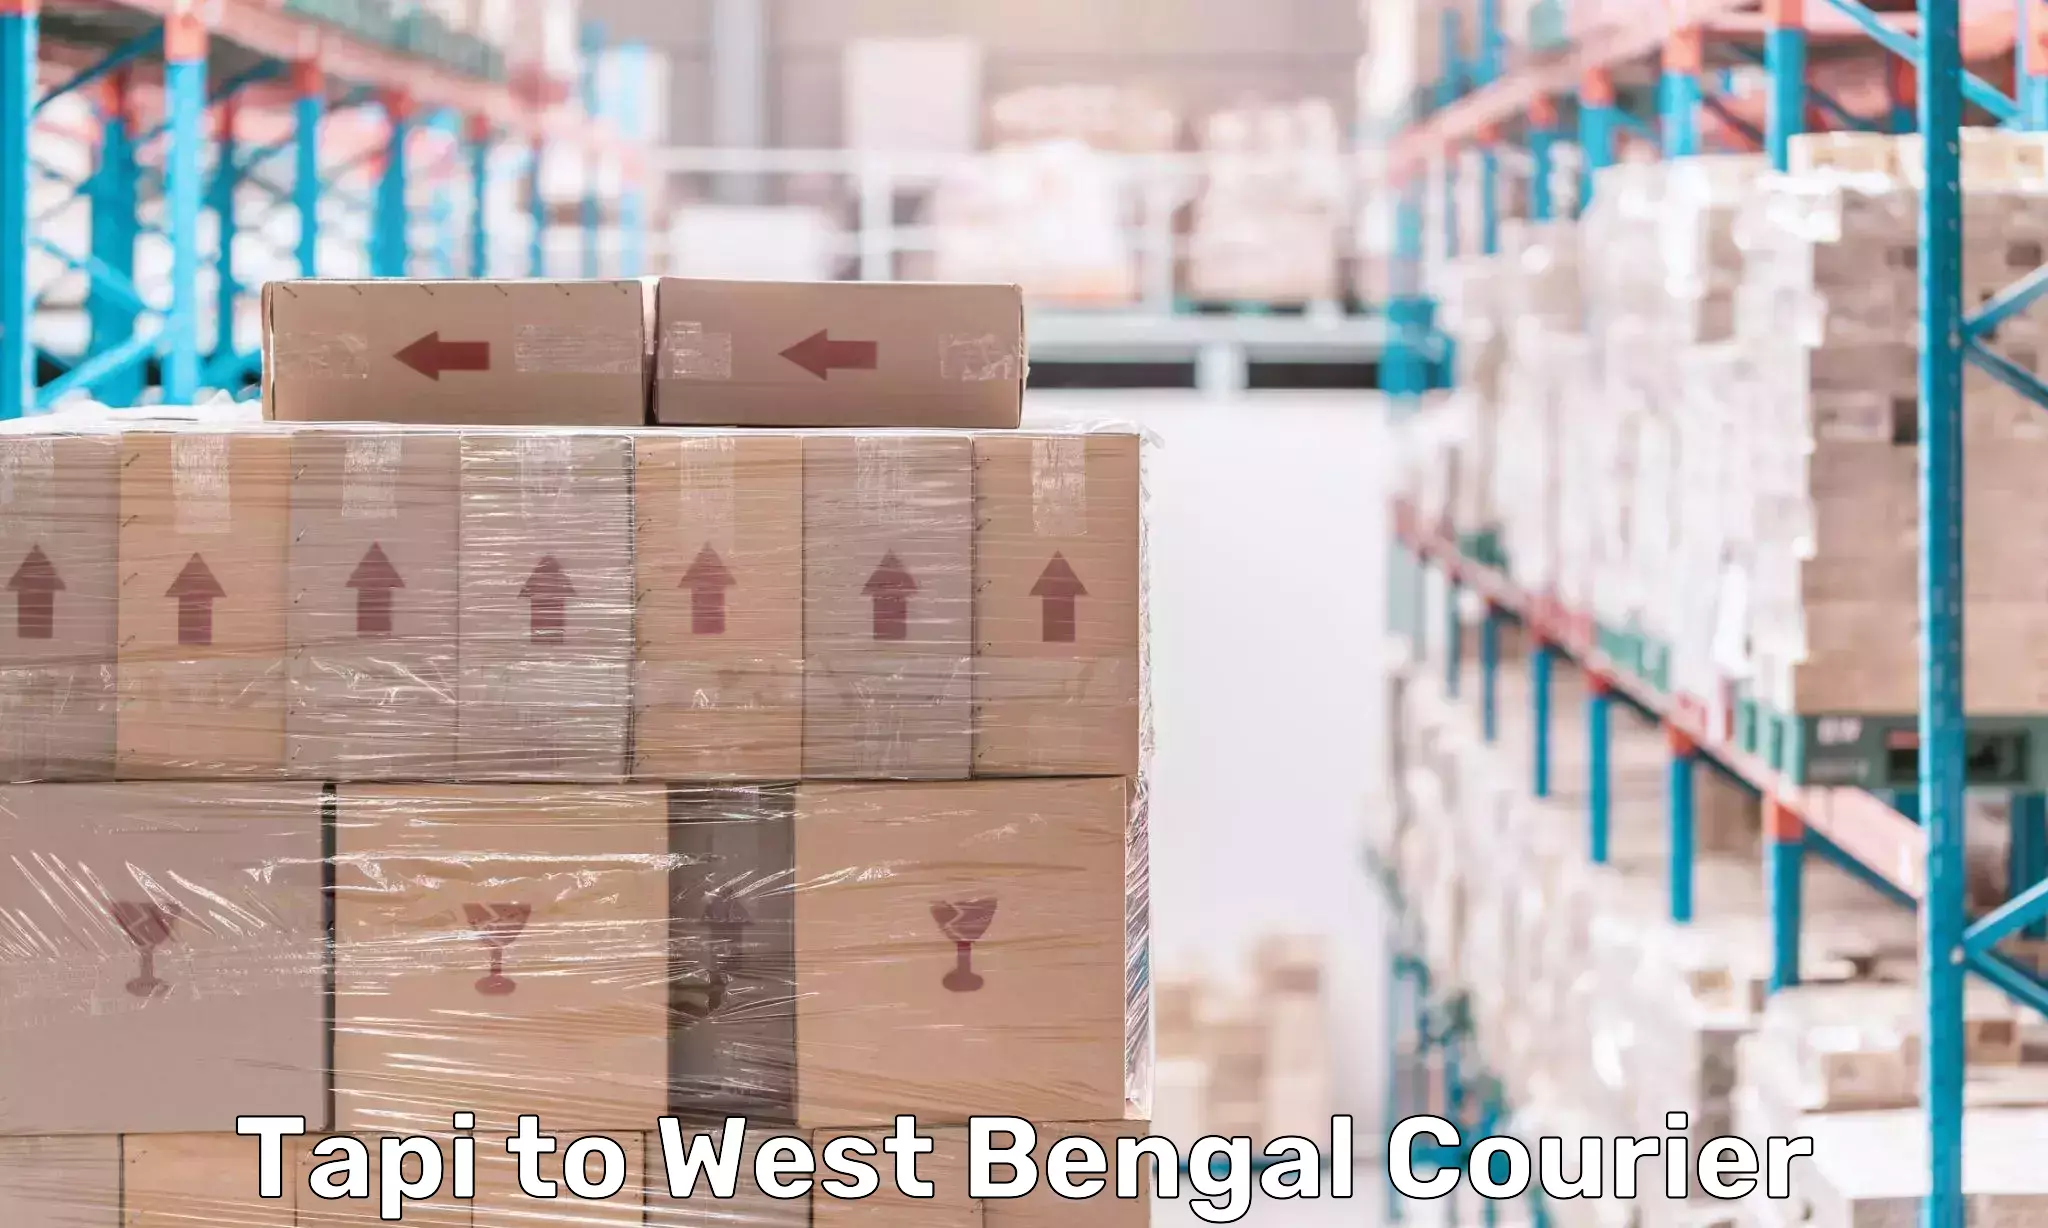 Sustainable shipping practices Tapi to West Bengal